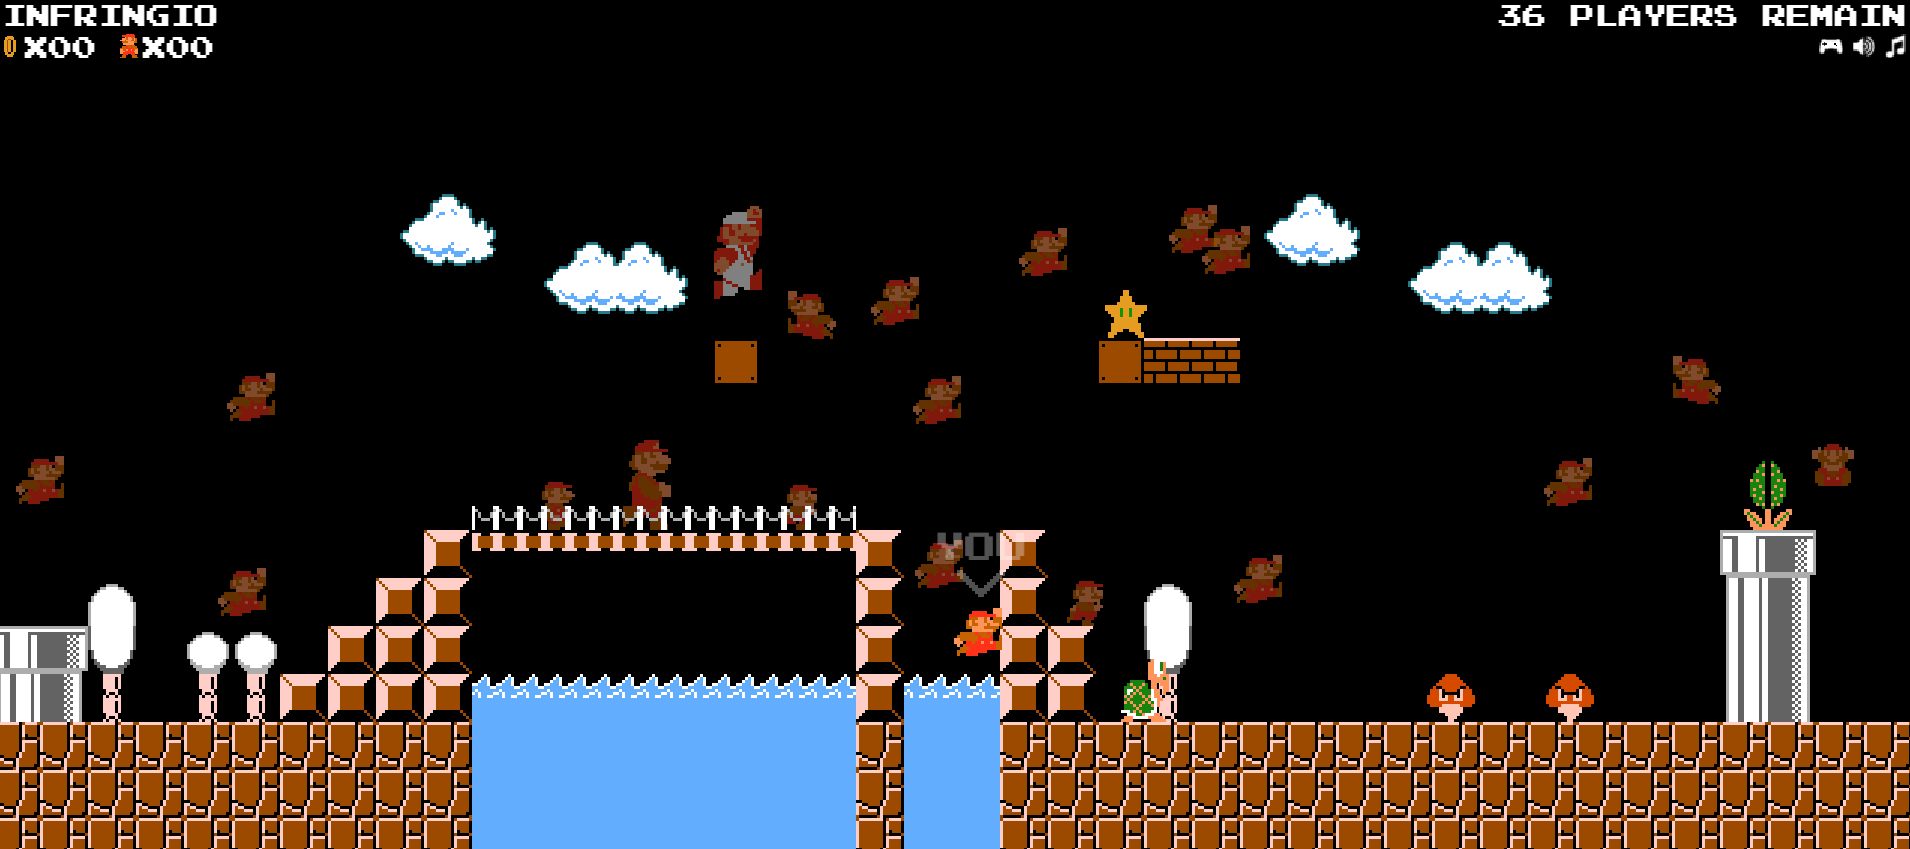 Super Mario makes for a shockingly good battle royale game - The Verge